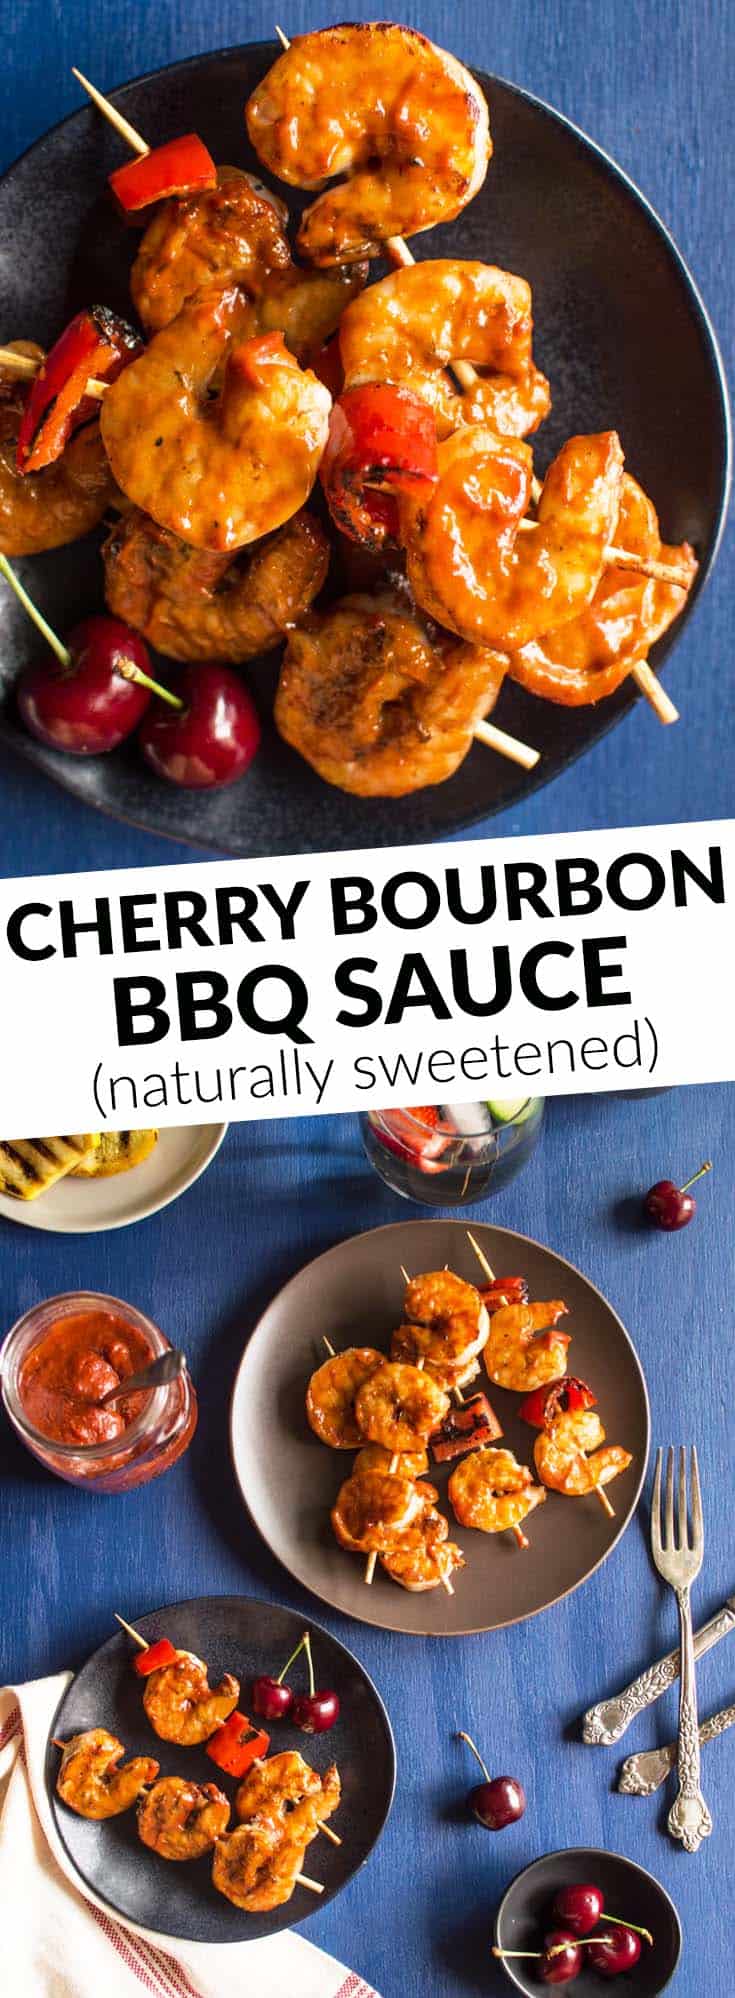 Cherry Bourbon Barbecue Sauce - no refined sugar! | by @healthynibs